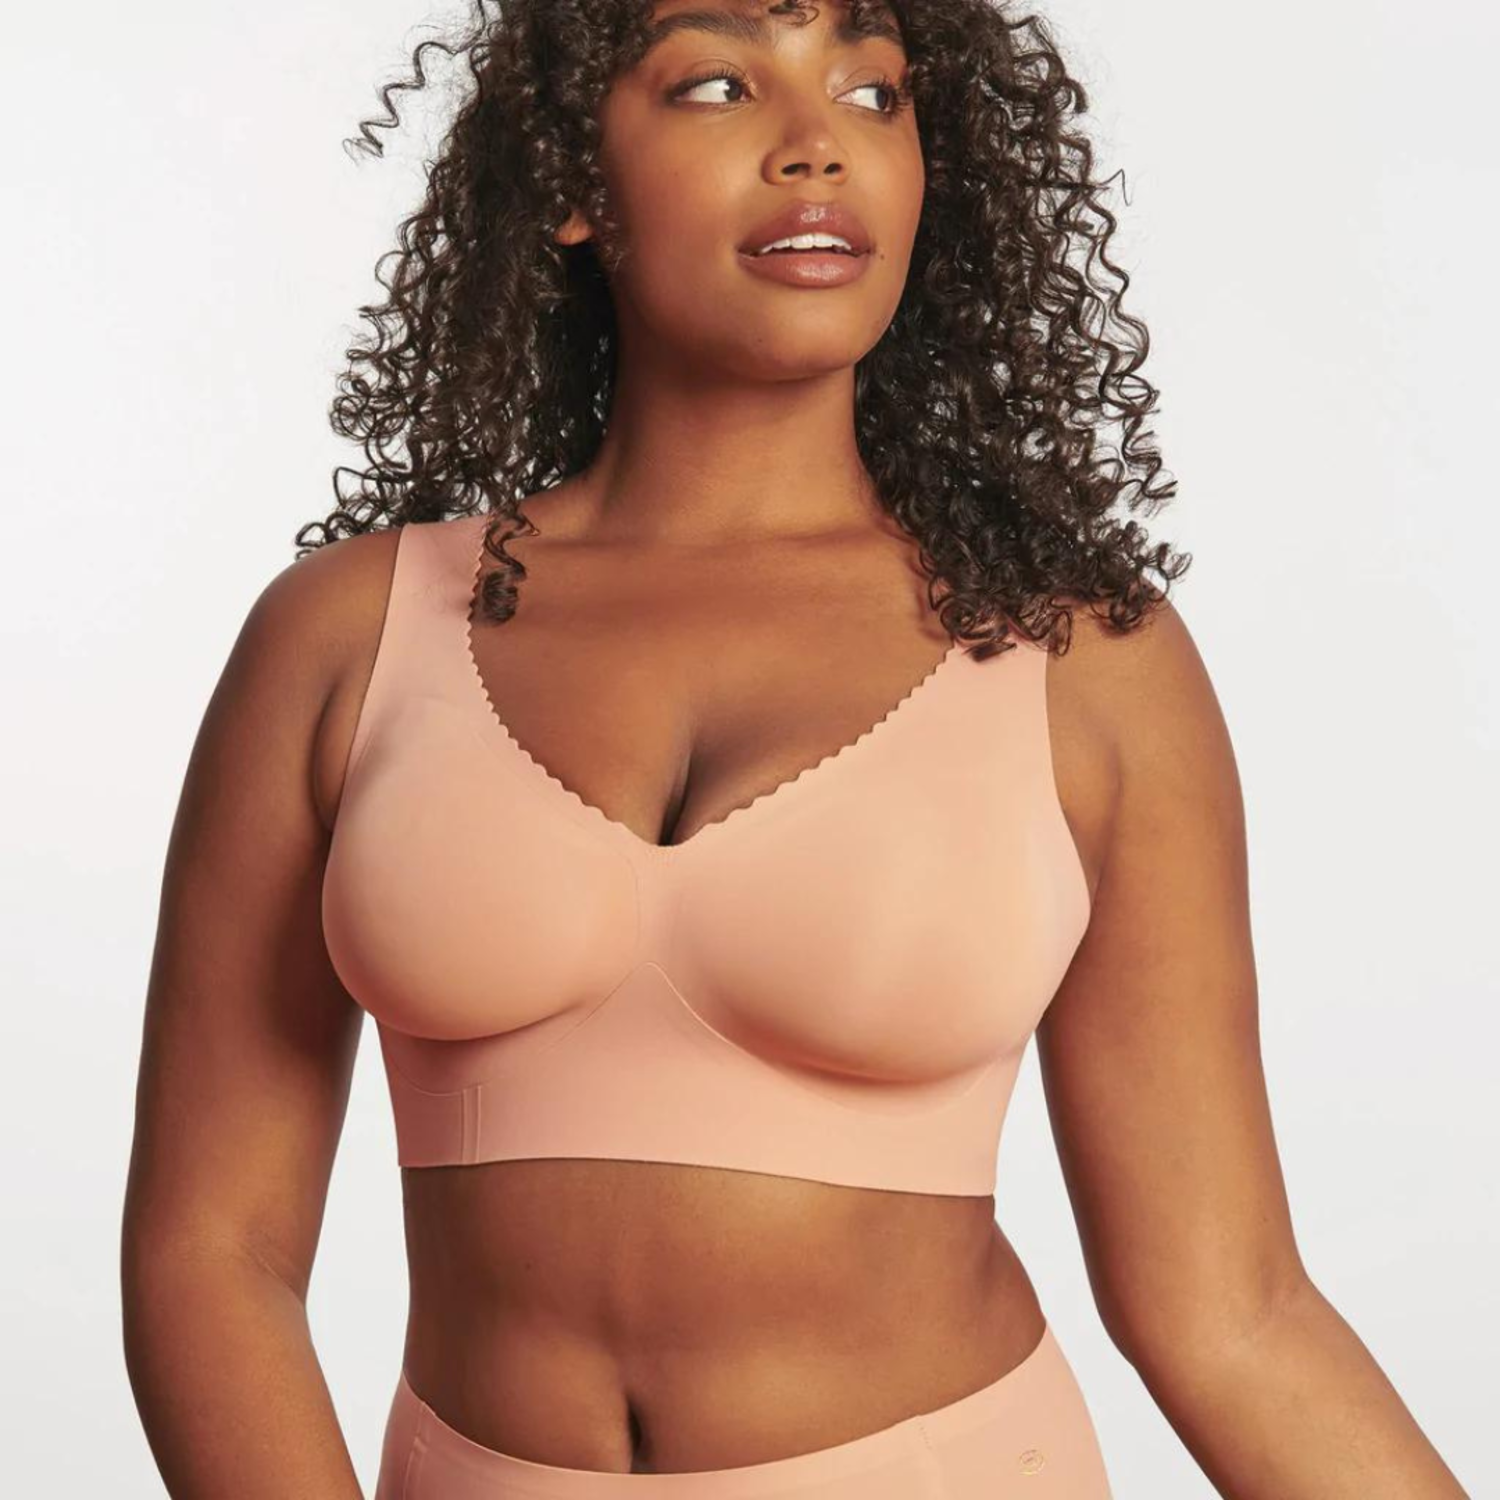 Sales of this $20 bralette is up 779,000% on  Canada's